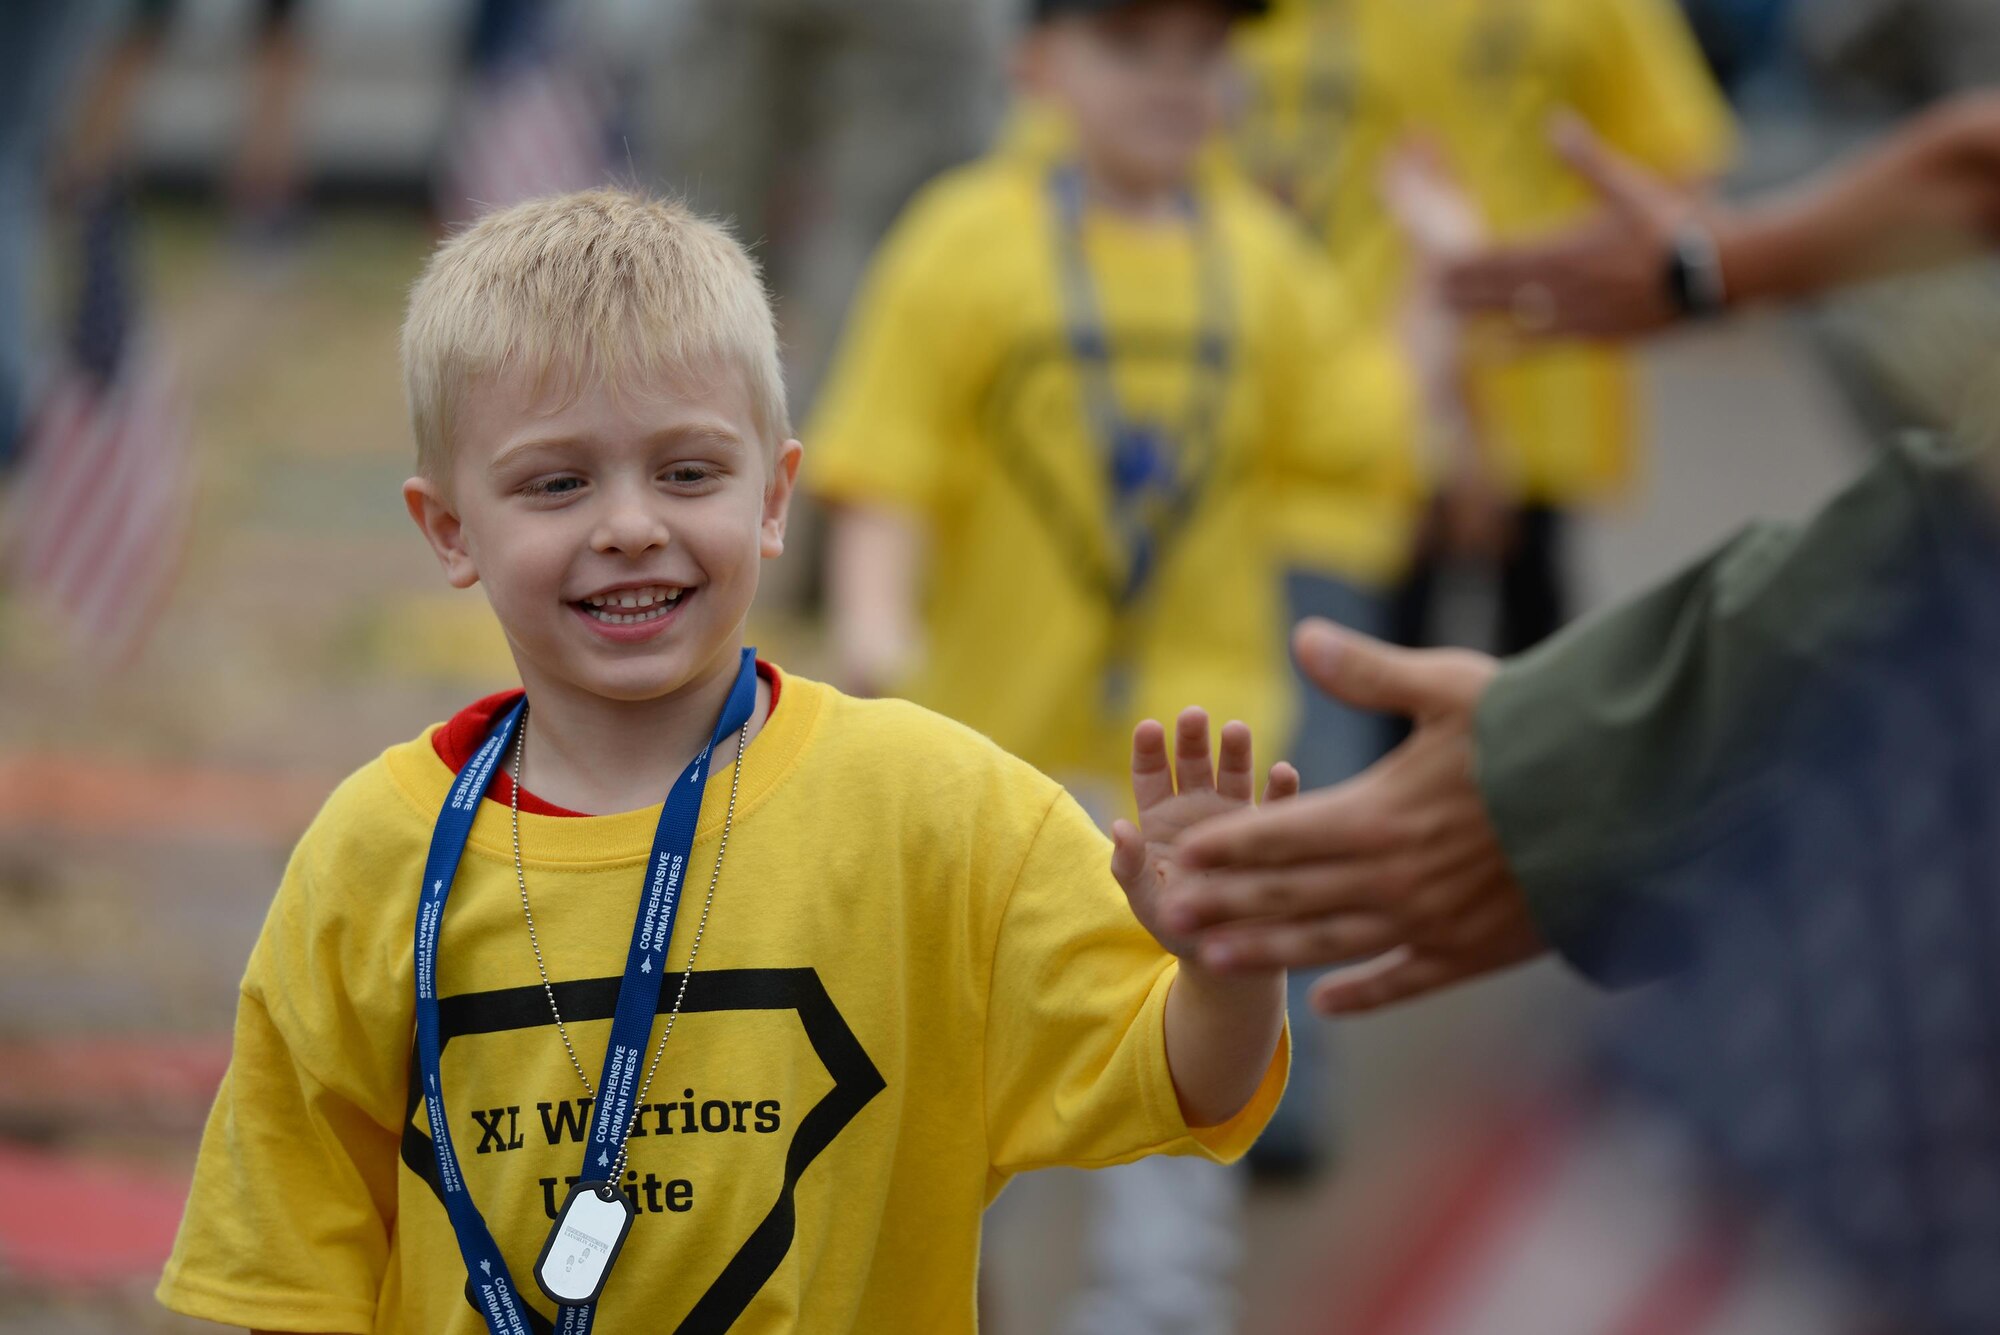 A junior deployer celebrates as he returns from his mock deployment, on Laughlin Air Force Base, Texas, Nov. 5, 2016. A junior deployment was held for base and local children to experience what a deployment could be like for military members. (U.S. Air Force photo/Airman 1st Class Benjamin N. Valmoja)